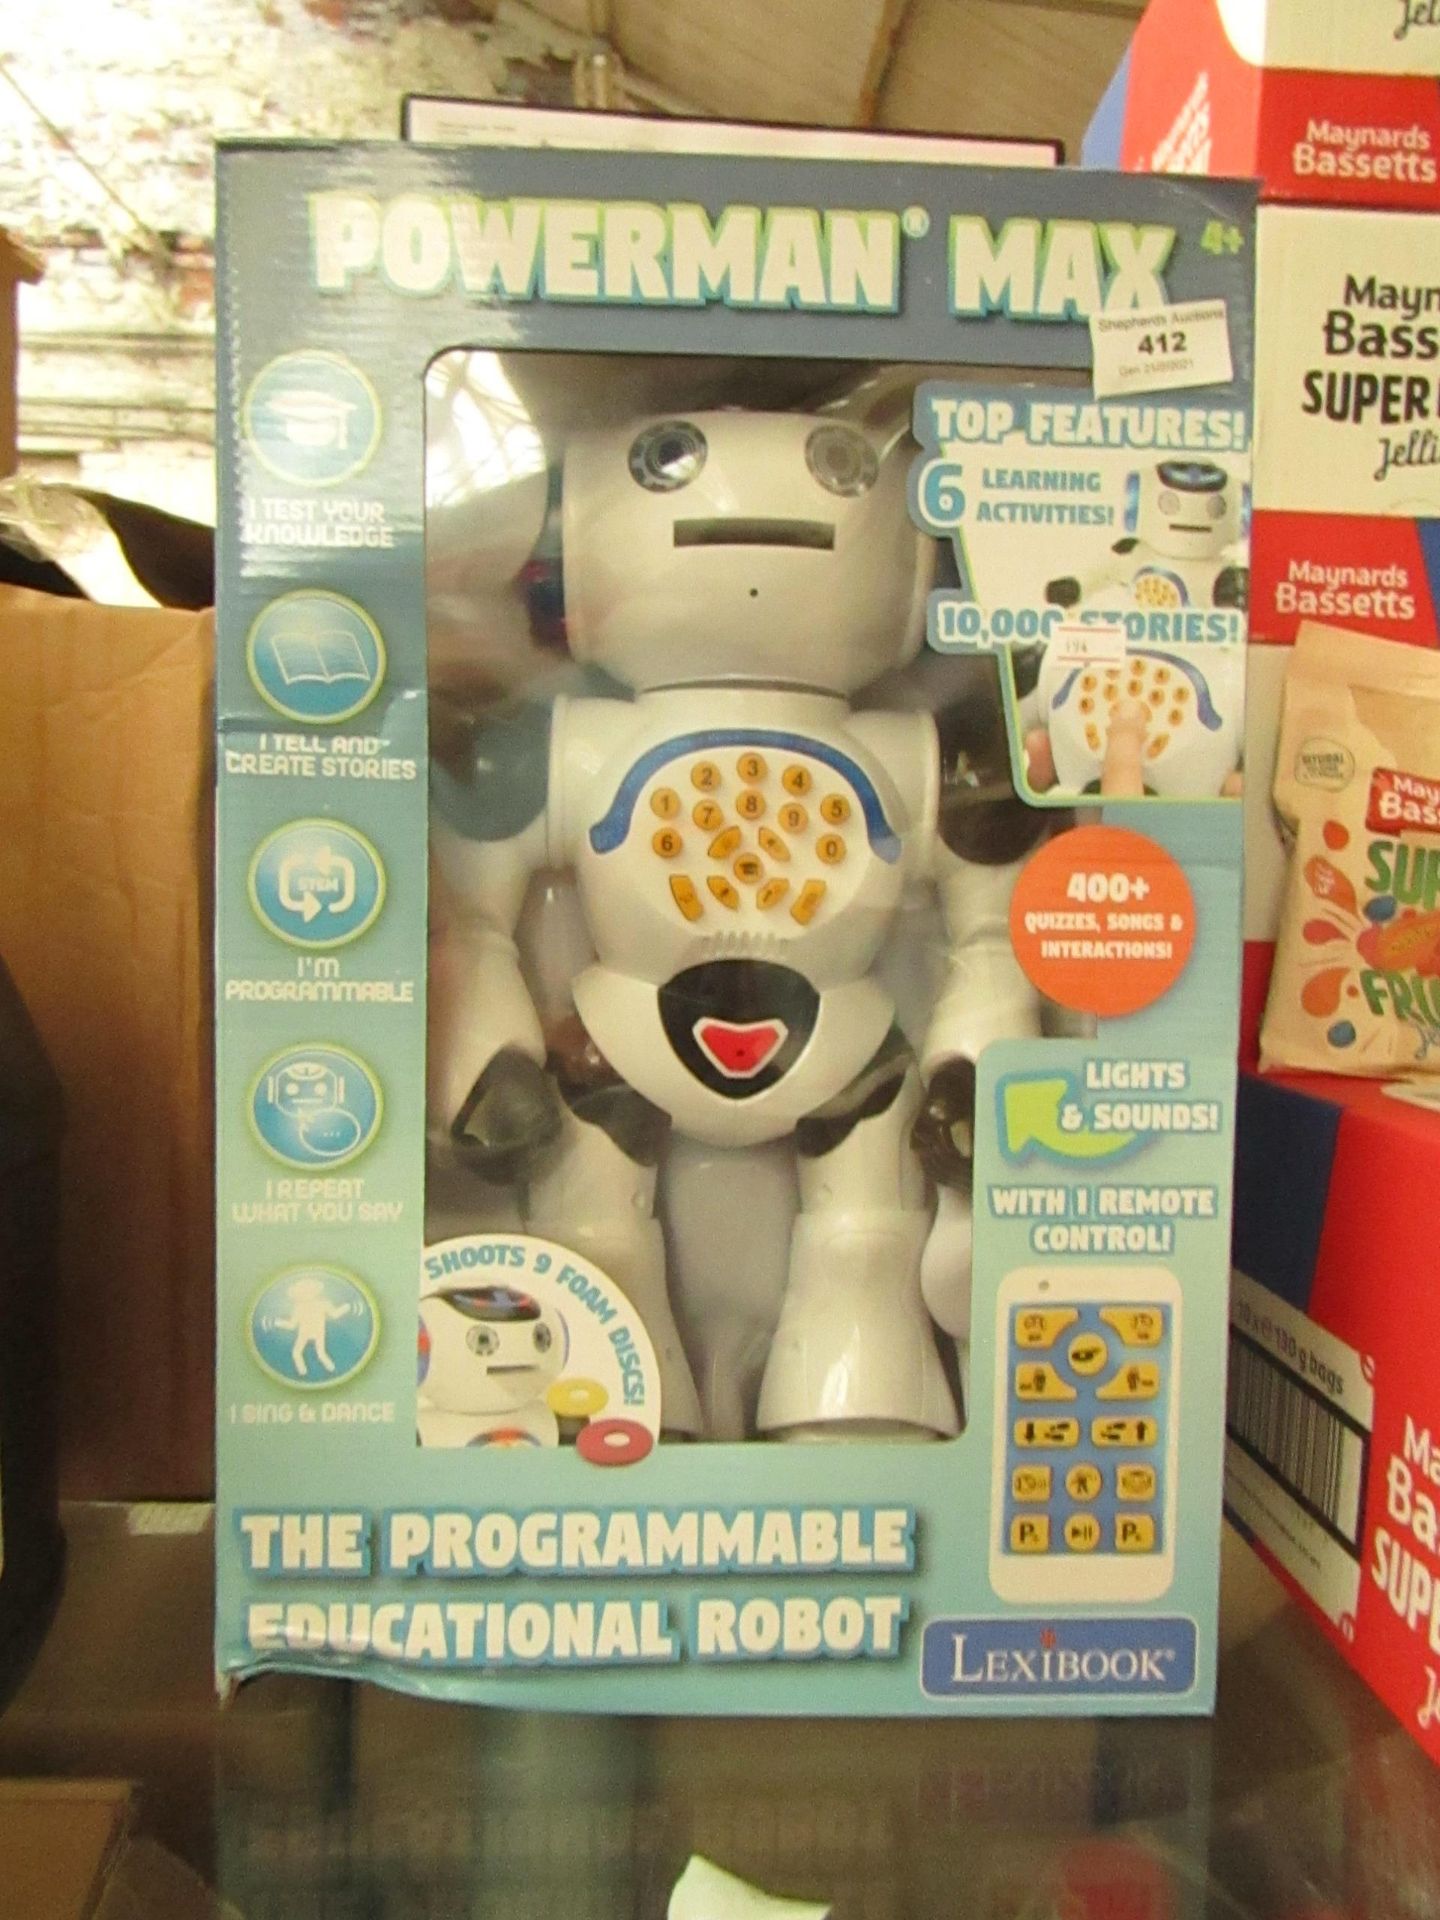 1 x Powerman Max Programmable Educational Robot packaged unchecked